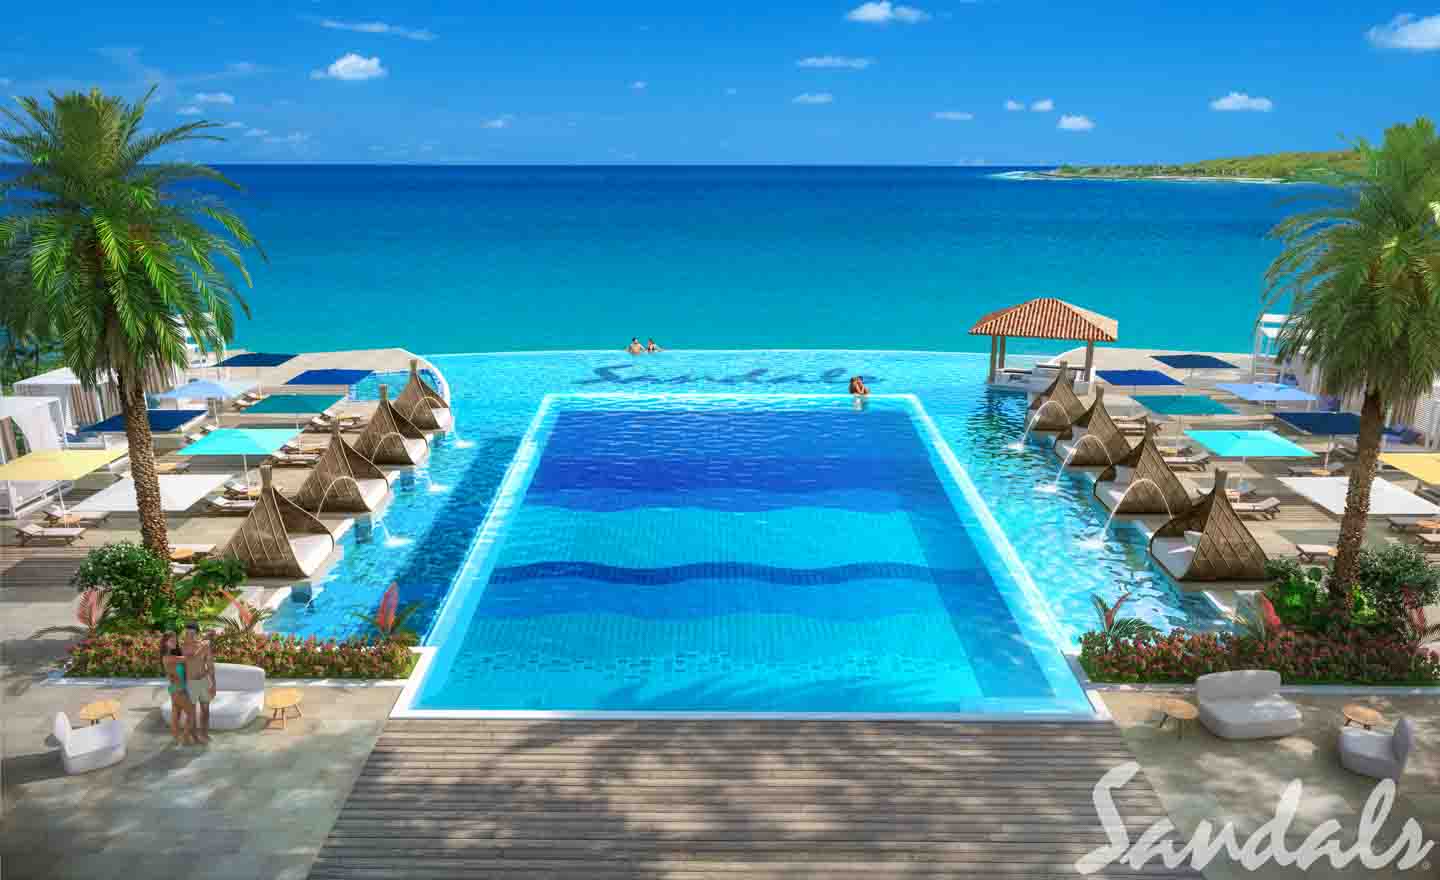 Sandals Royal Curacao (Now OPEN) – Everything you NEED to Know